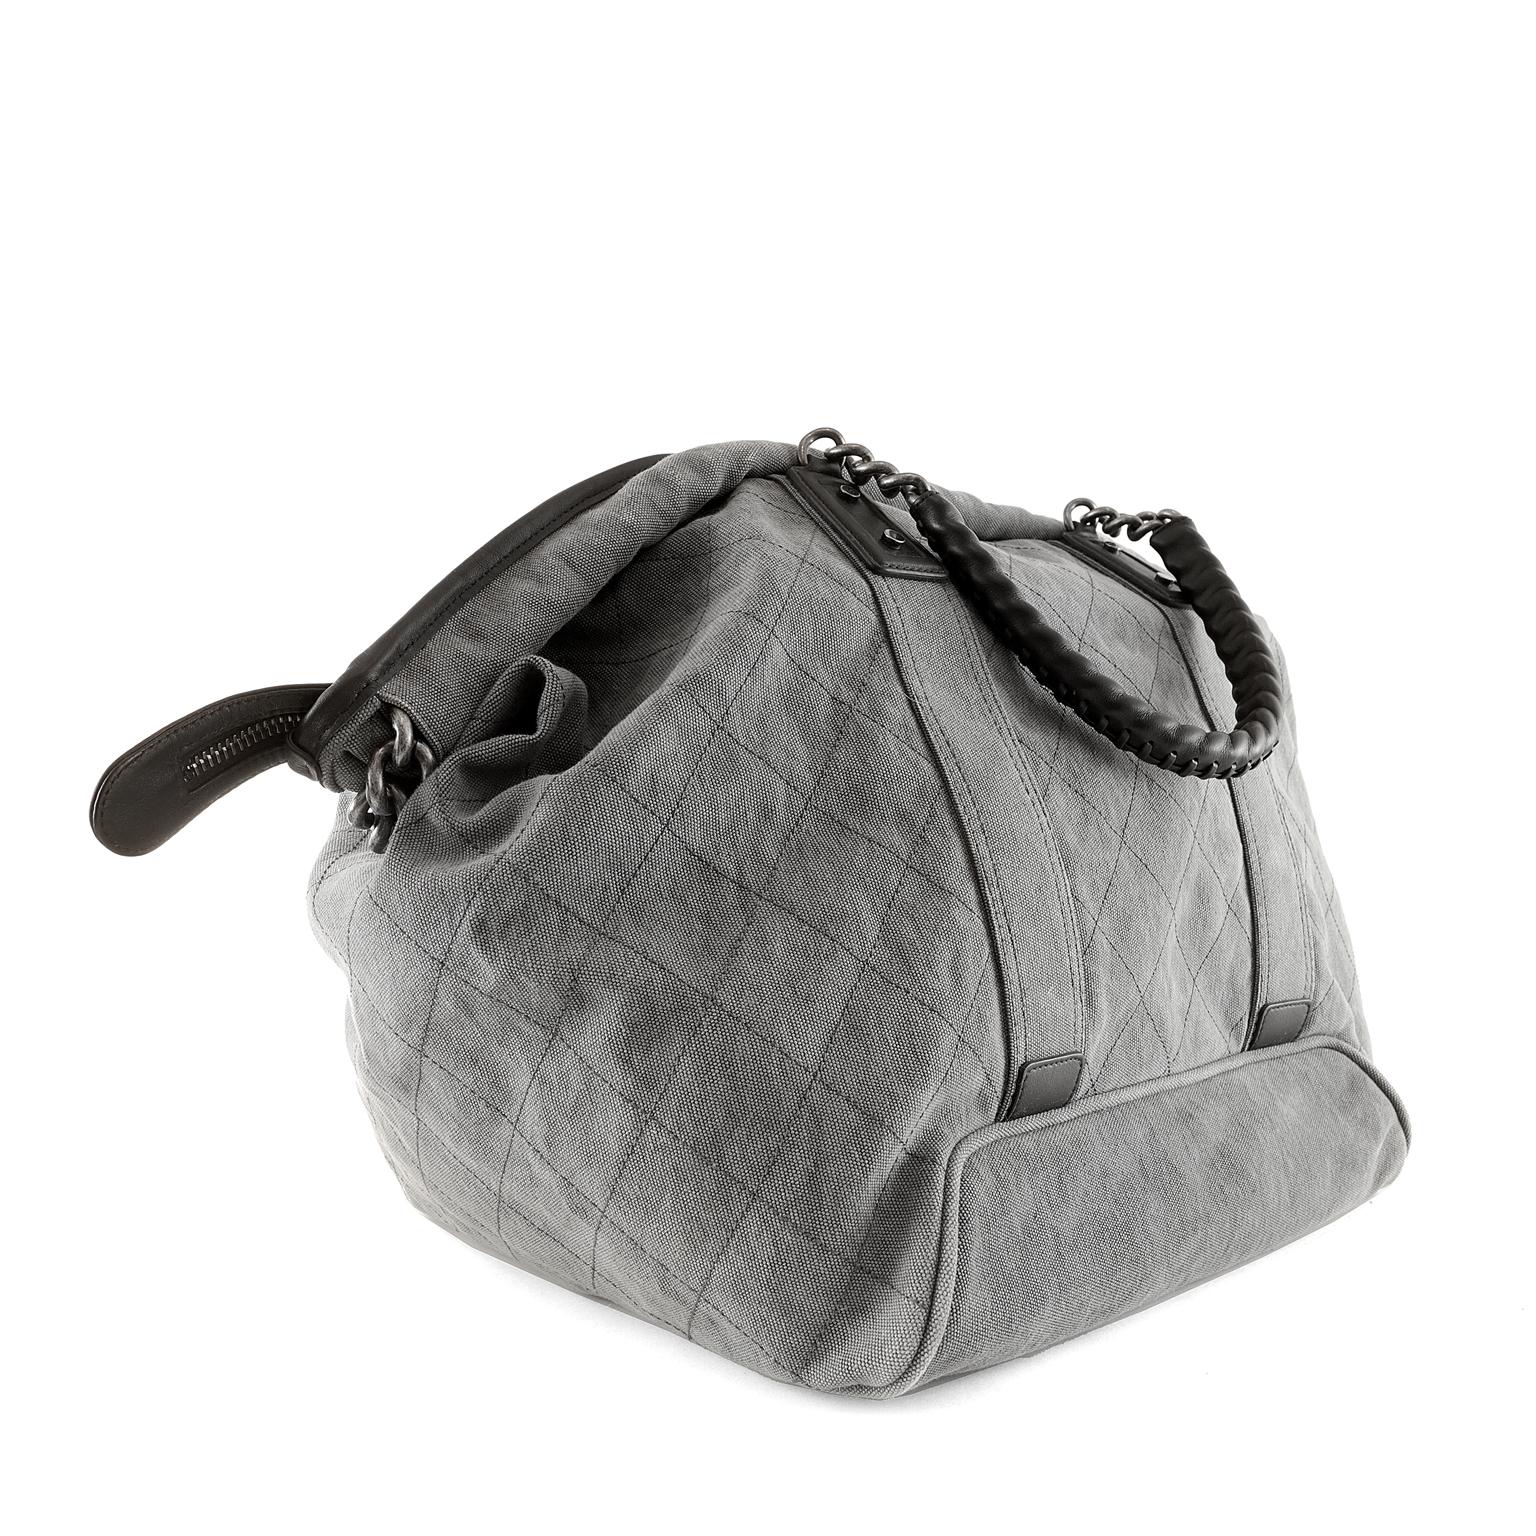 Chanel Slate Grey Canvas XL Tote-Excellent Plus Condition
Perfect for travel and quick getaways, the unisex style is chic and roomy.
Slate grey canvas tote has tonal topstitching in signature Chanel diamond pattern.  Two way zippered top accesses